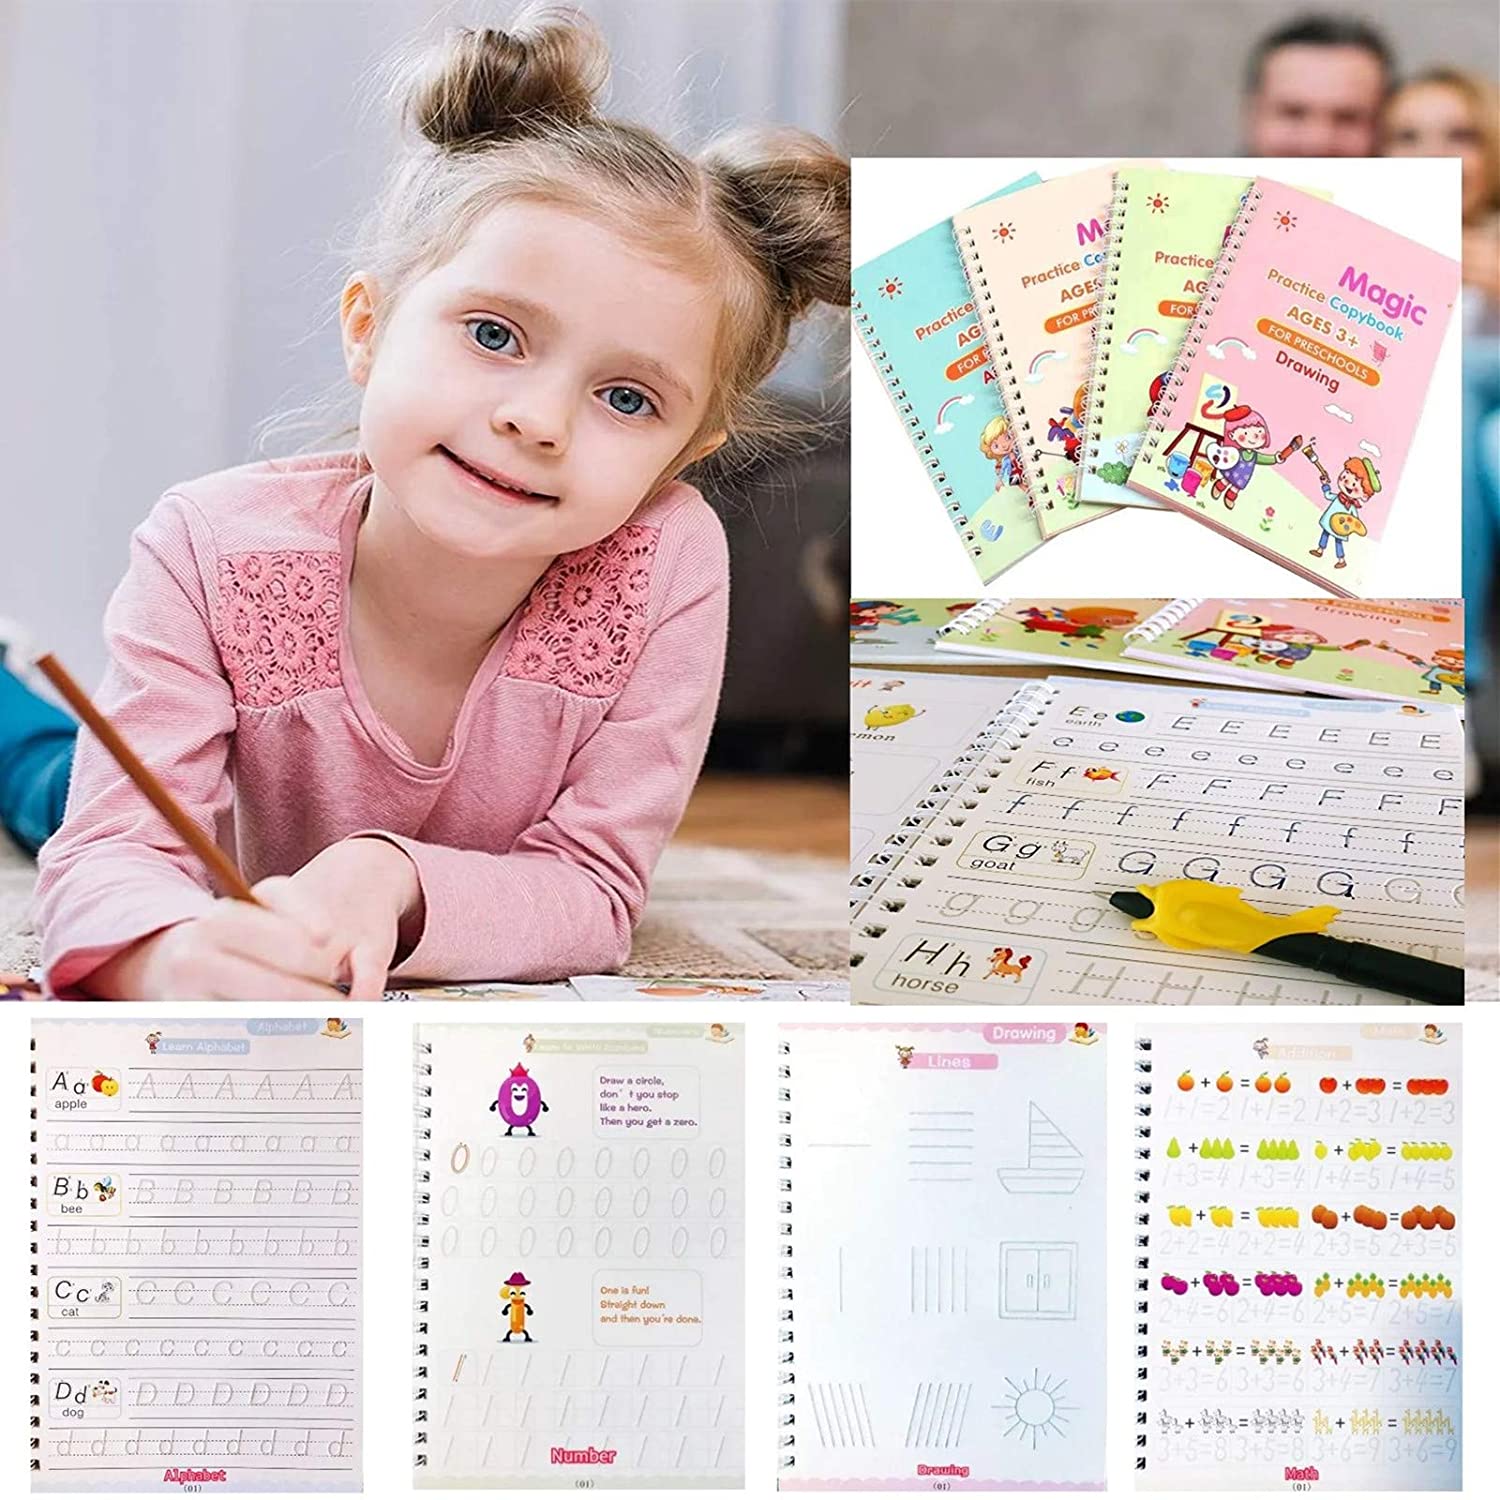 8075 4 Pc Magic Copybook widely used by kids, children’s and even adults also to write down important things over it while emergencies etc. DeoDap